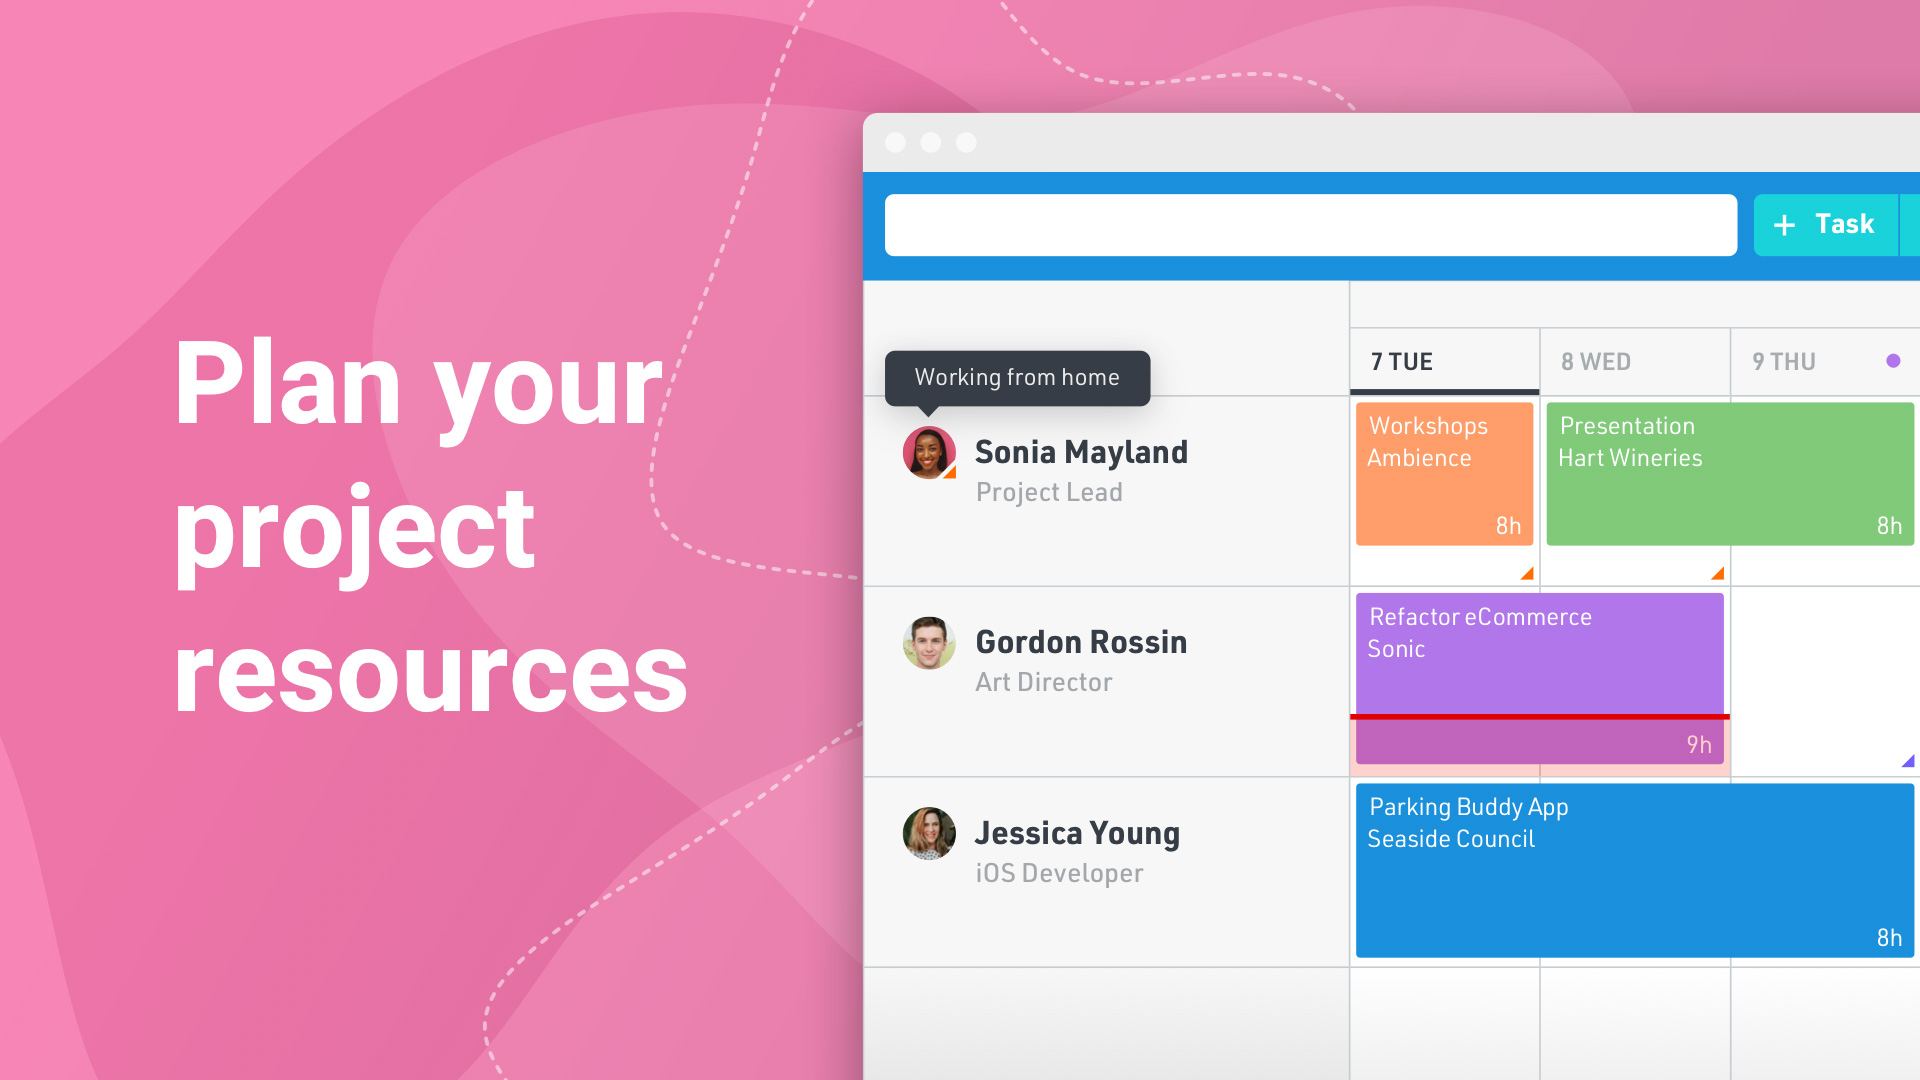 Float is a Resource Planning Tool used by the World’s Top Creative Teams